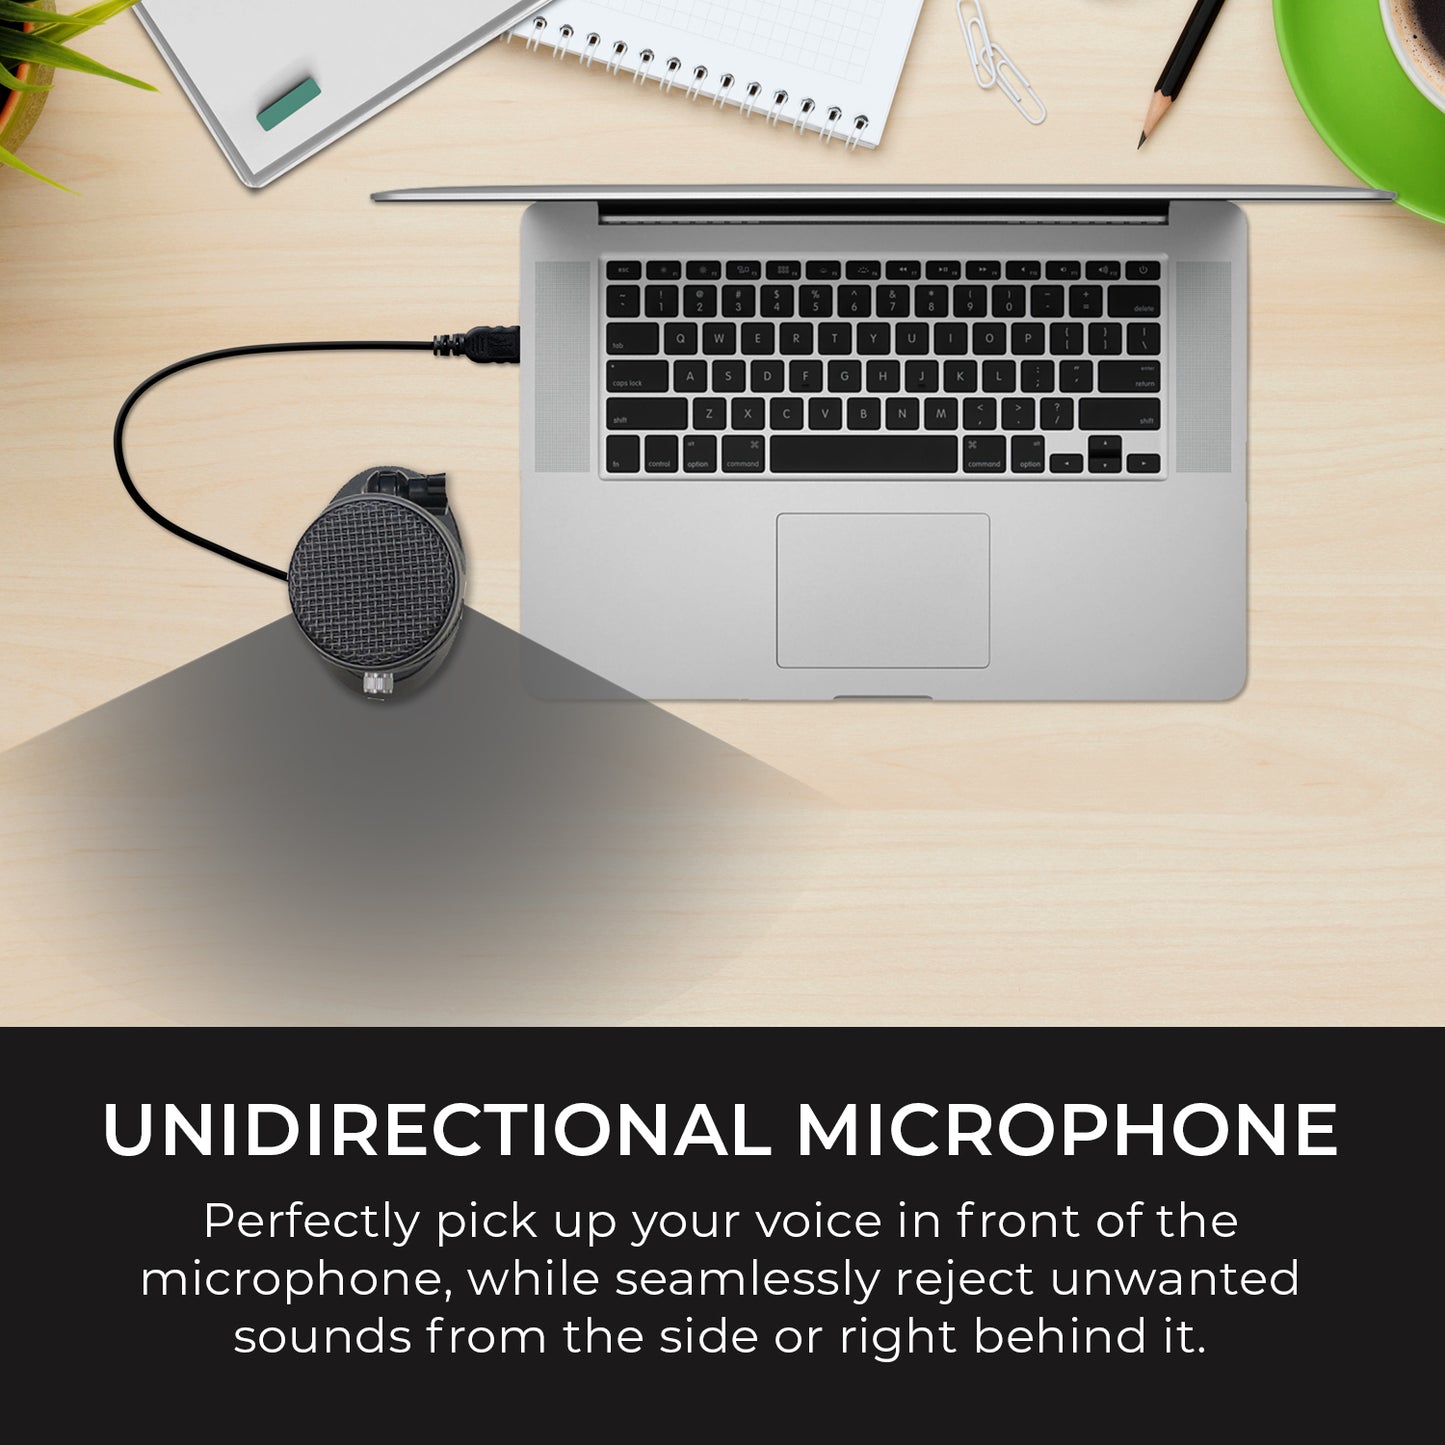 Unidirectional microphone: Perfectly pick up your voice in front of the microphone, while seamlessly reject unwanted sounds from the side or right behind it.